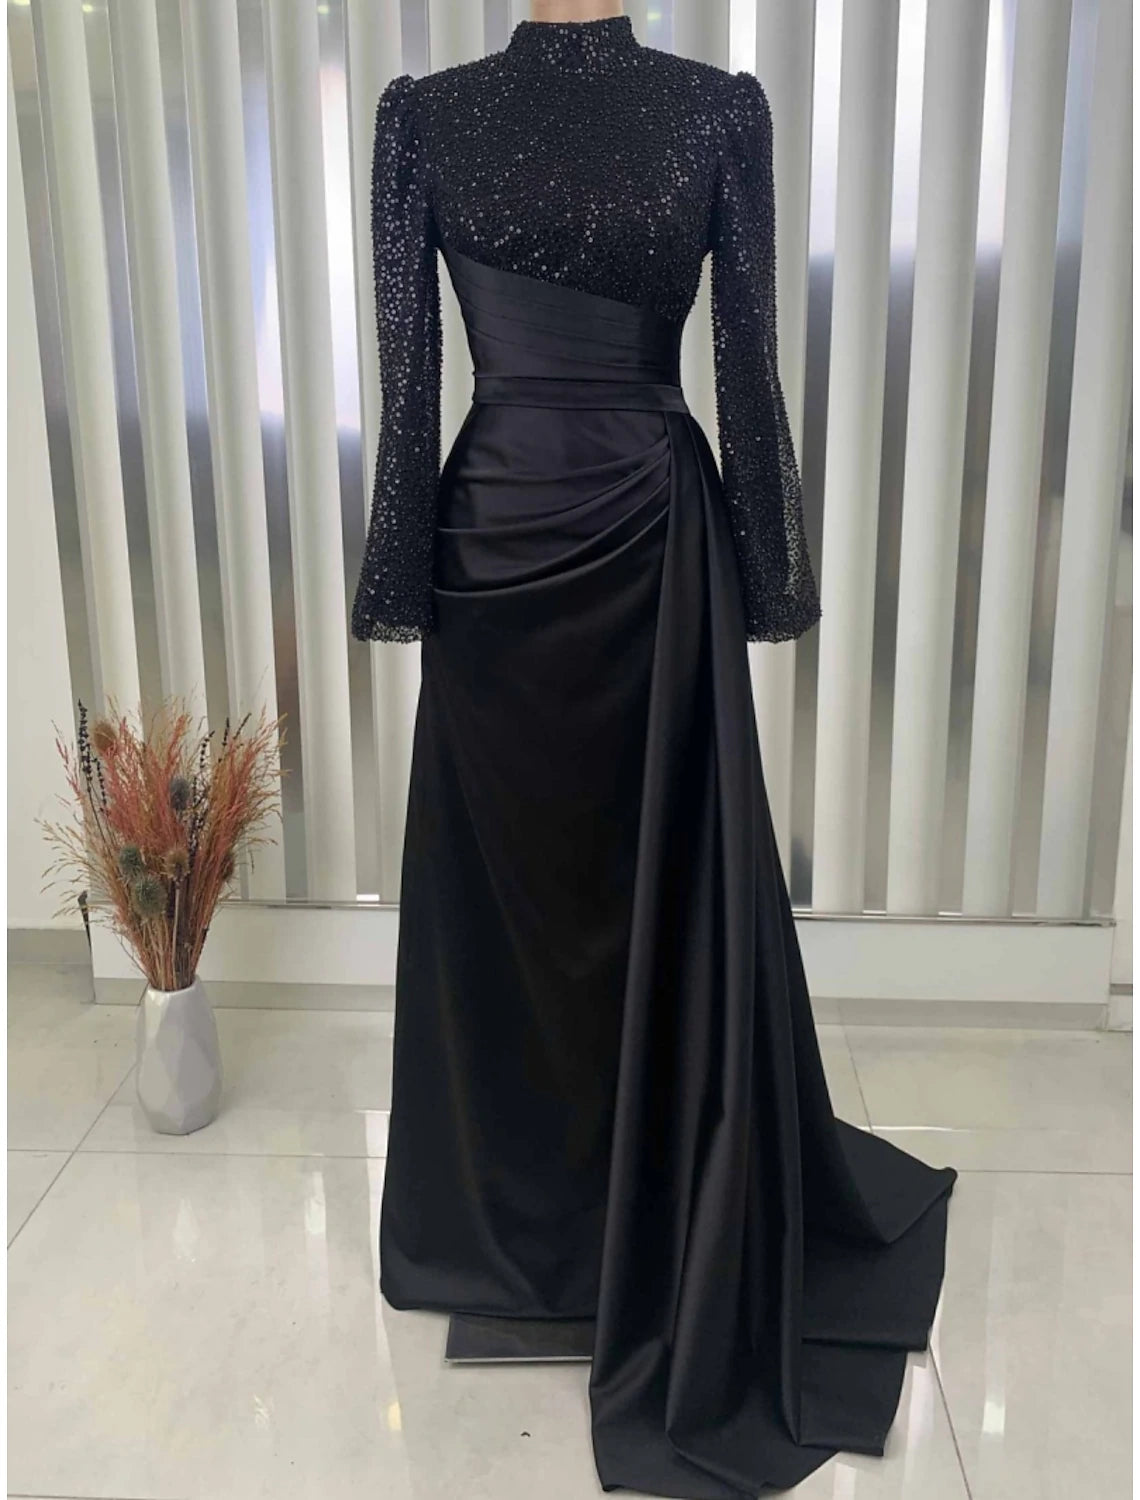 A-Line Evening Gown Champagne Christmas Elegant Dress Formal Sweep / Brush Train Long Sleeve High Neck Satin with Glitter Pleats Ruched